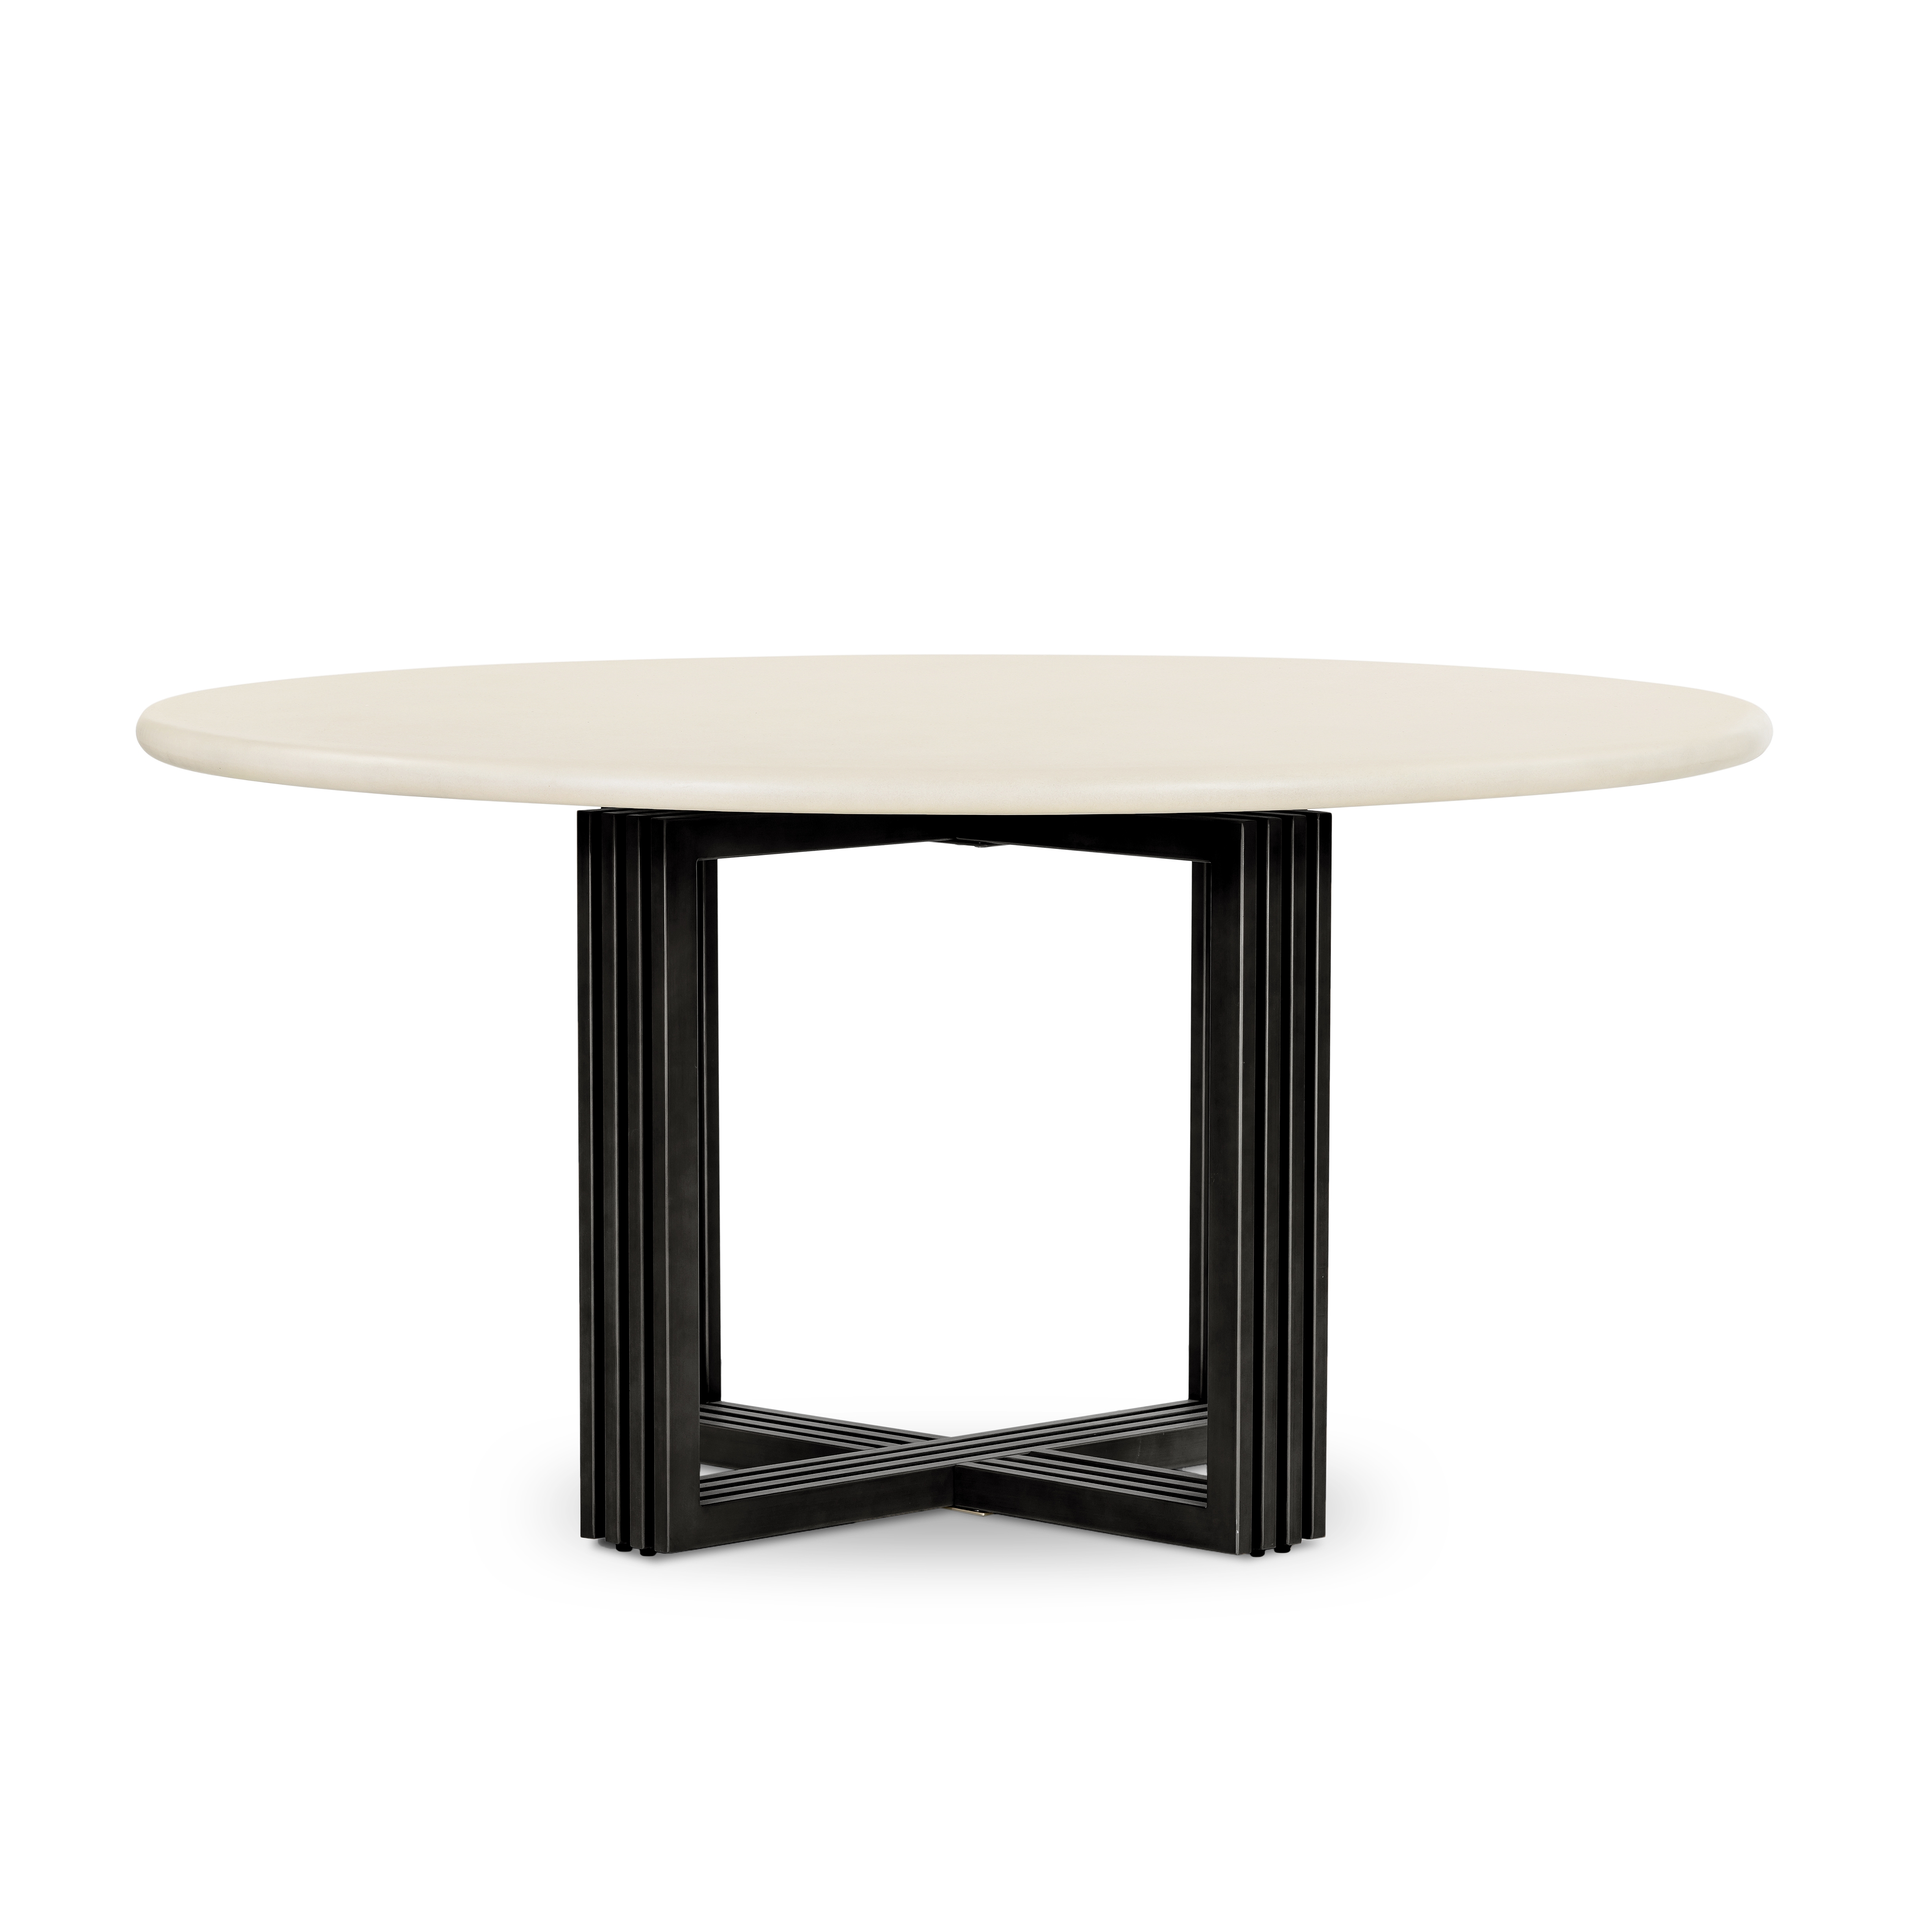 Mia Round Dining Table-Parchment White - Image 3